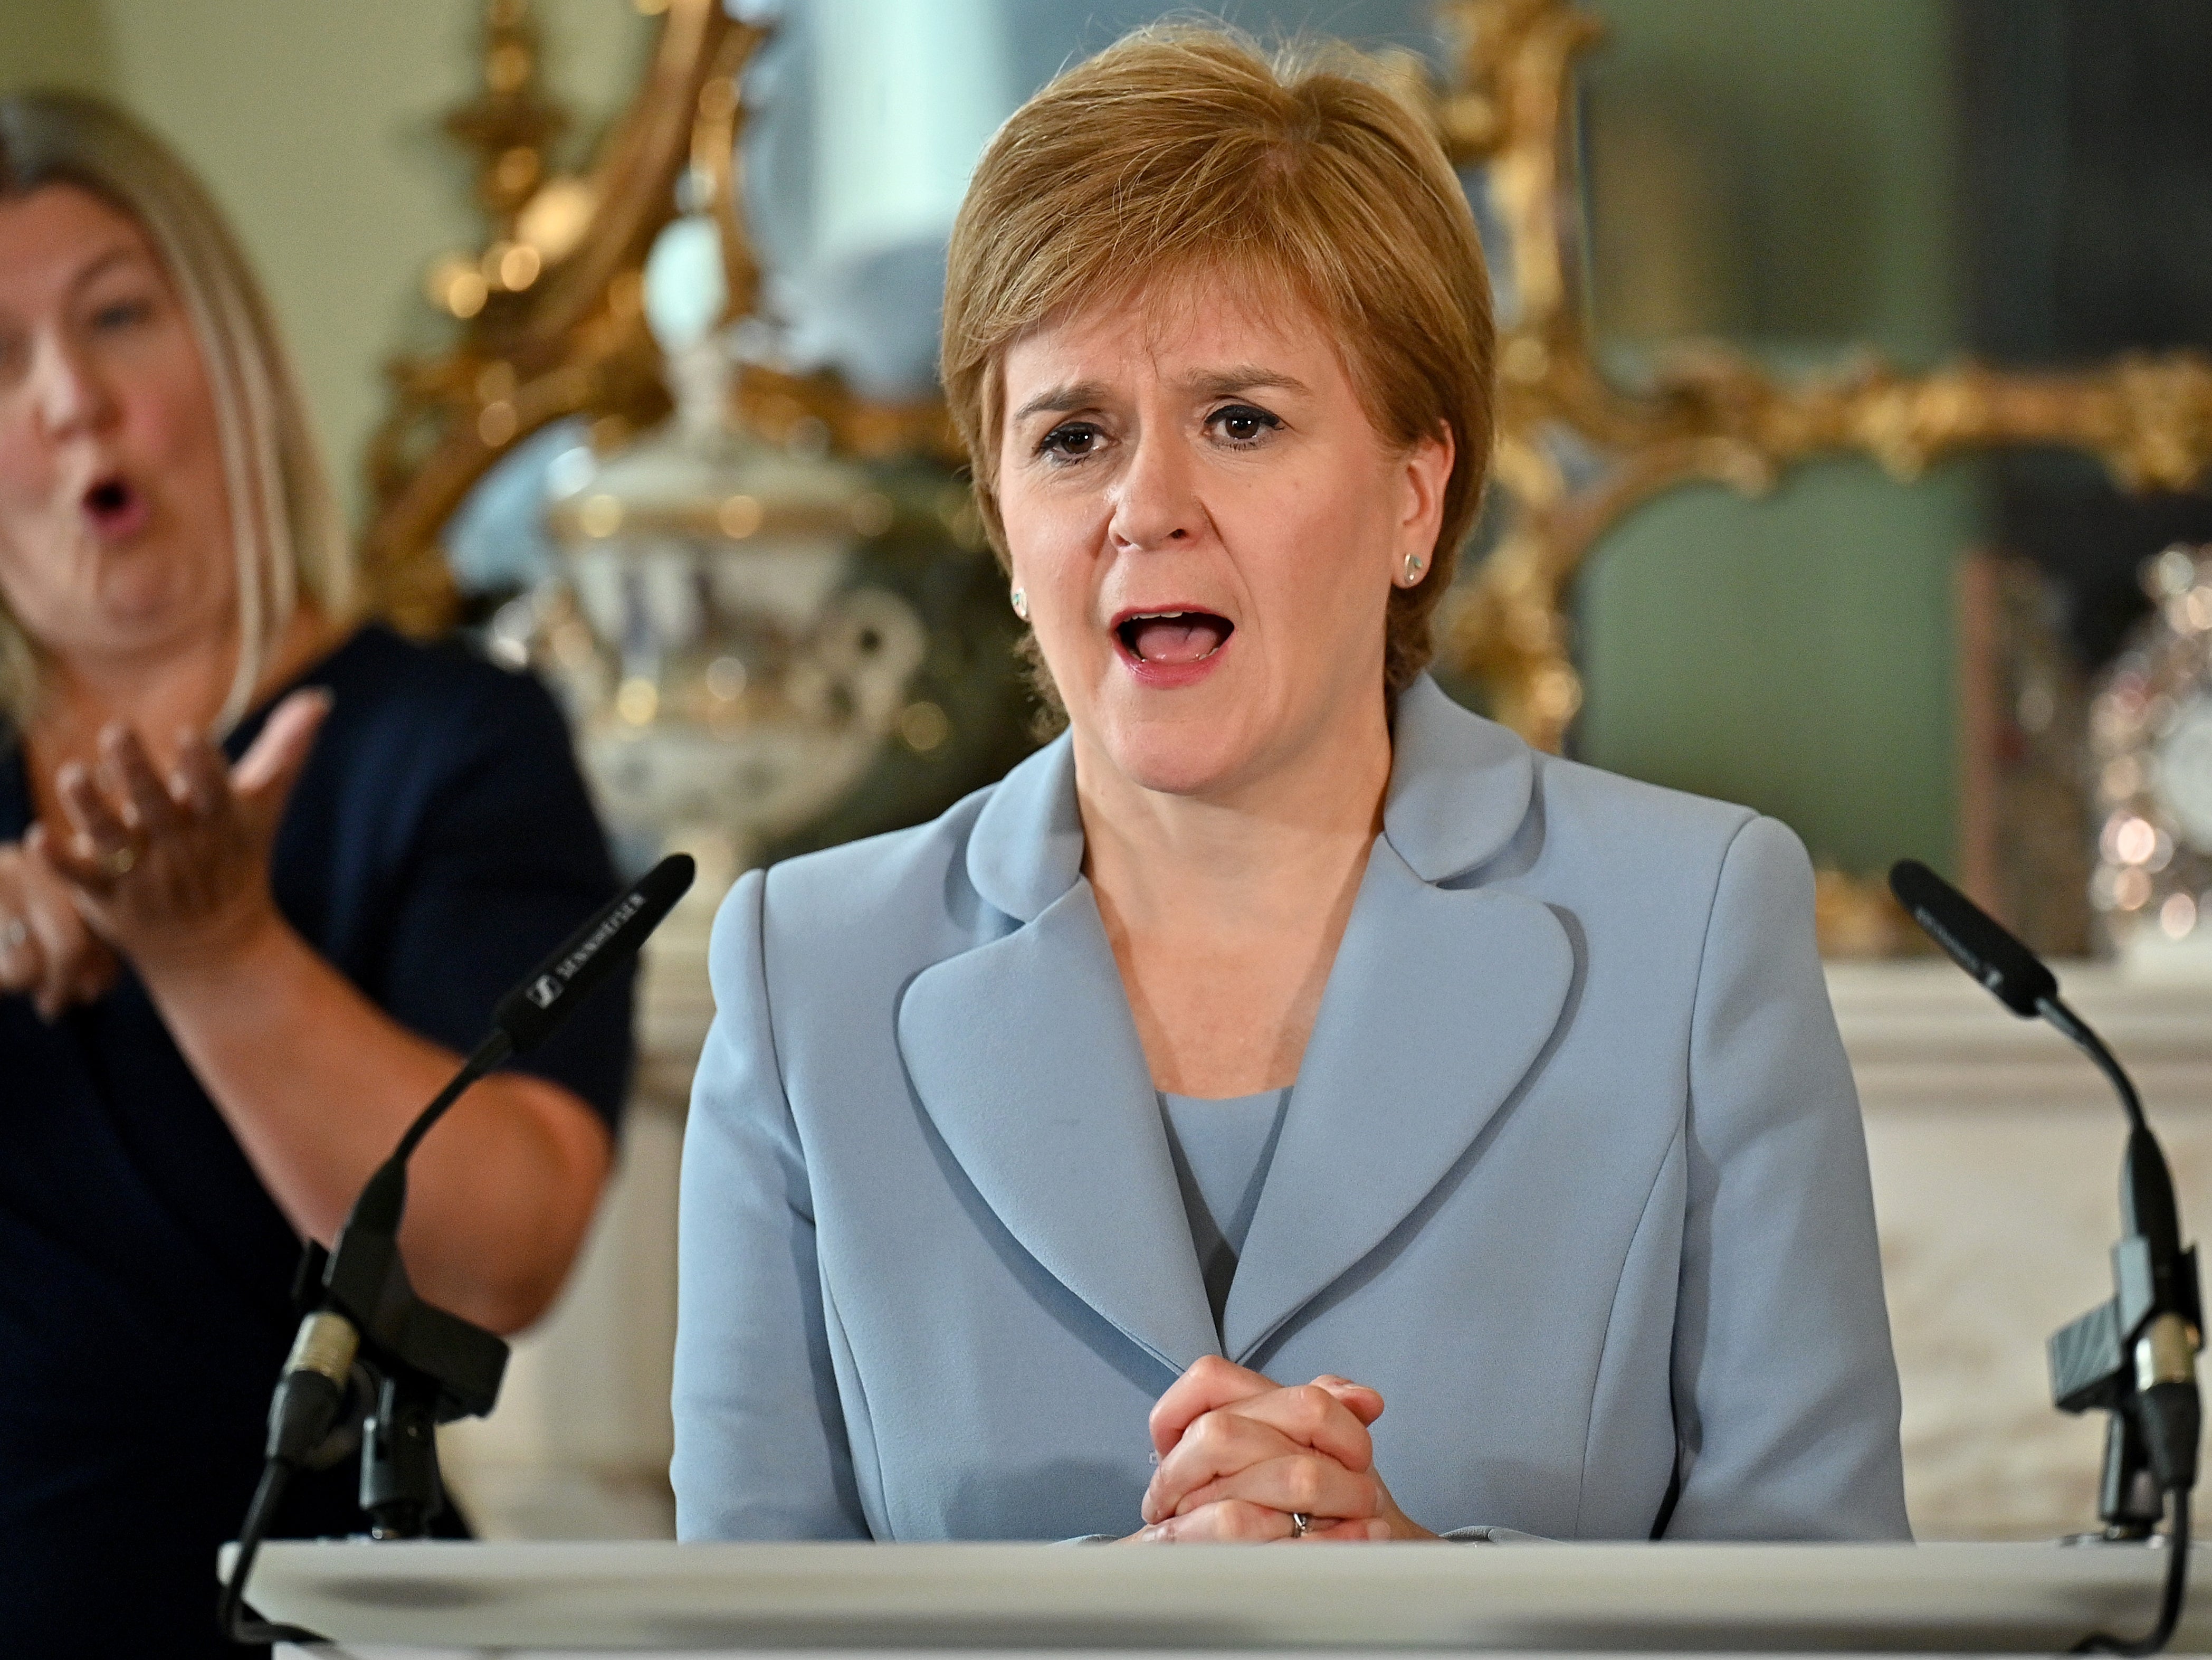 The first minister Nicola Sturgeon announces the SNP’s deal with the Scottish Greens